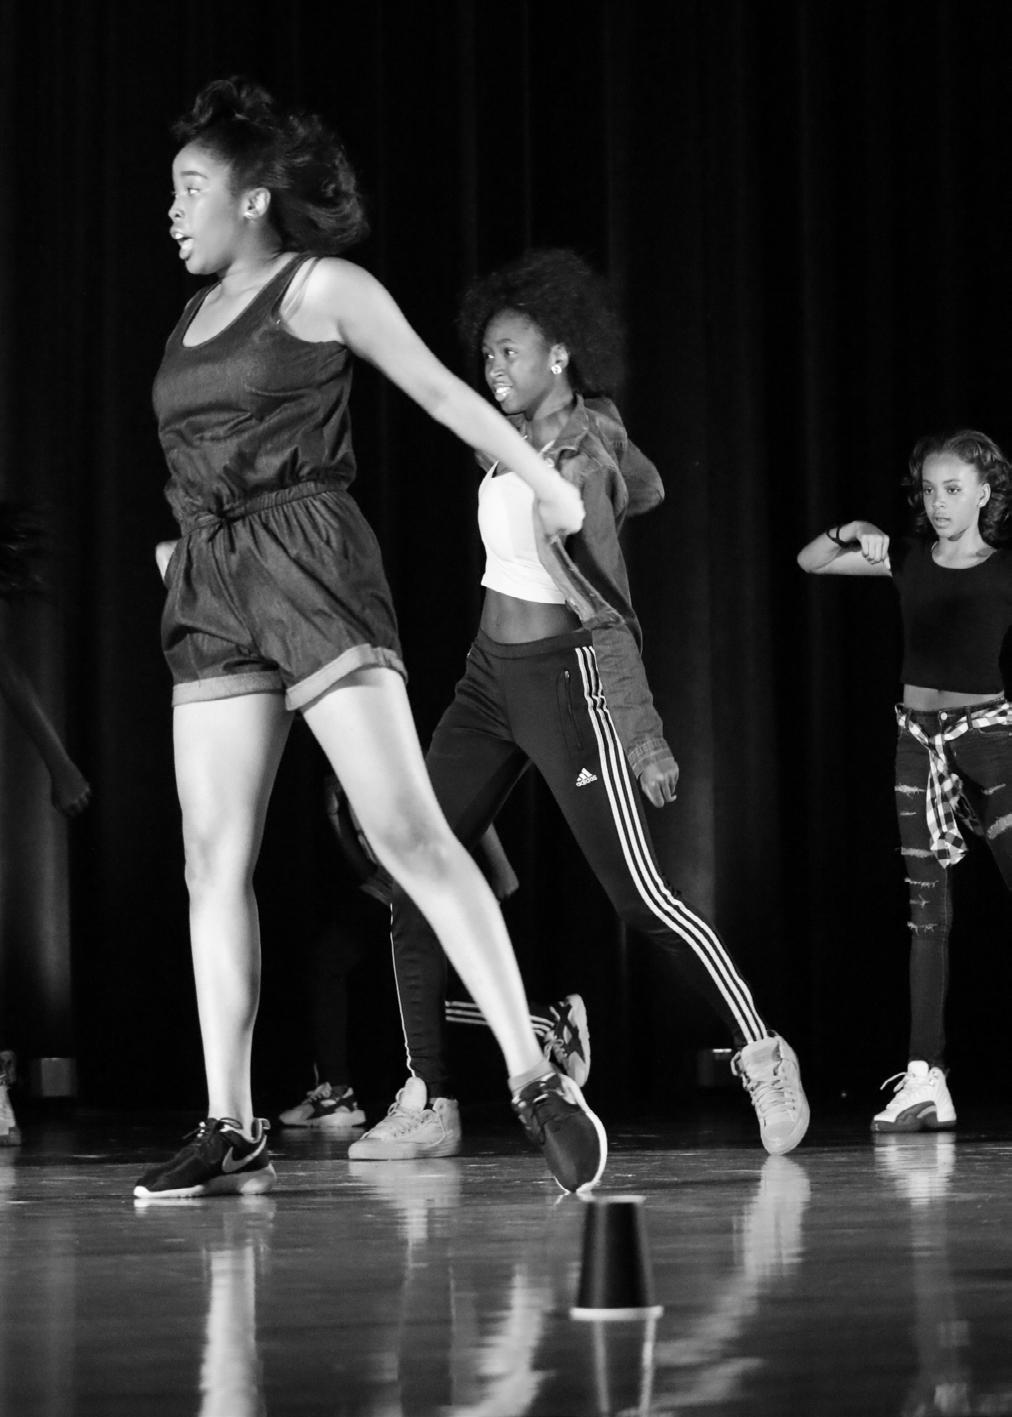 Cultural Arts - Dance Jazz/Tap Students will learn the basic beginning fundamentals and techniques of both Jazz and Tap dance. Ages: 6-10 years Dates: April 13 - May 25 Saturday Time: 12:30-1:30 p.m. 320264-06 Tap I & II Basic tap exercises are practiced on the barre and in the center of the floor.